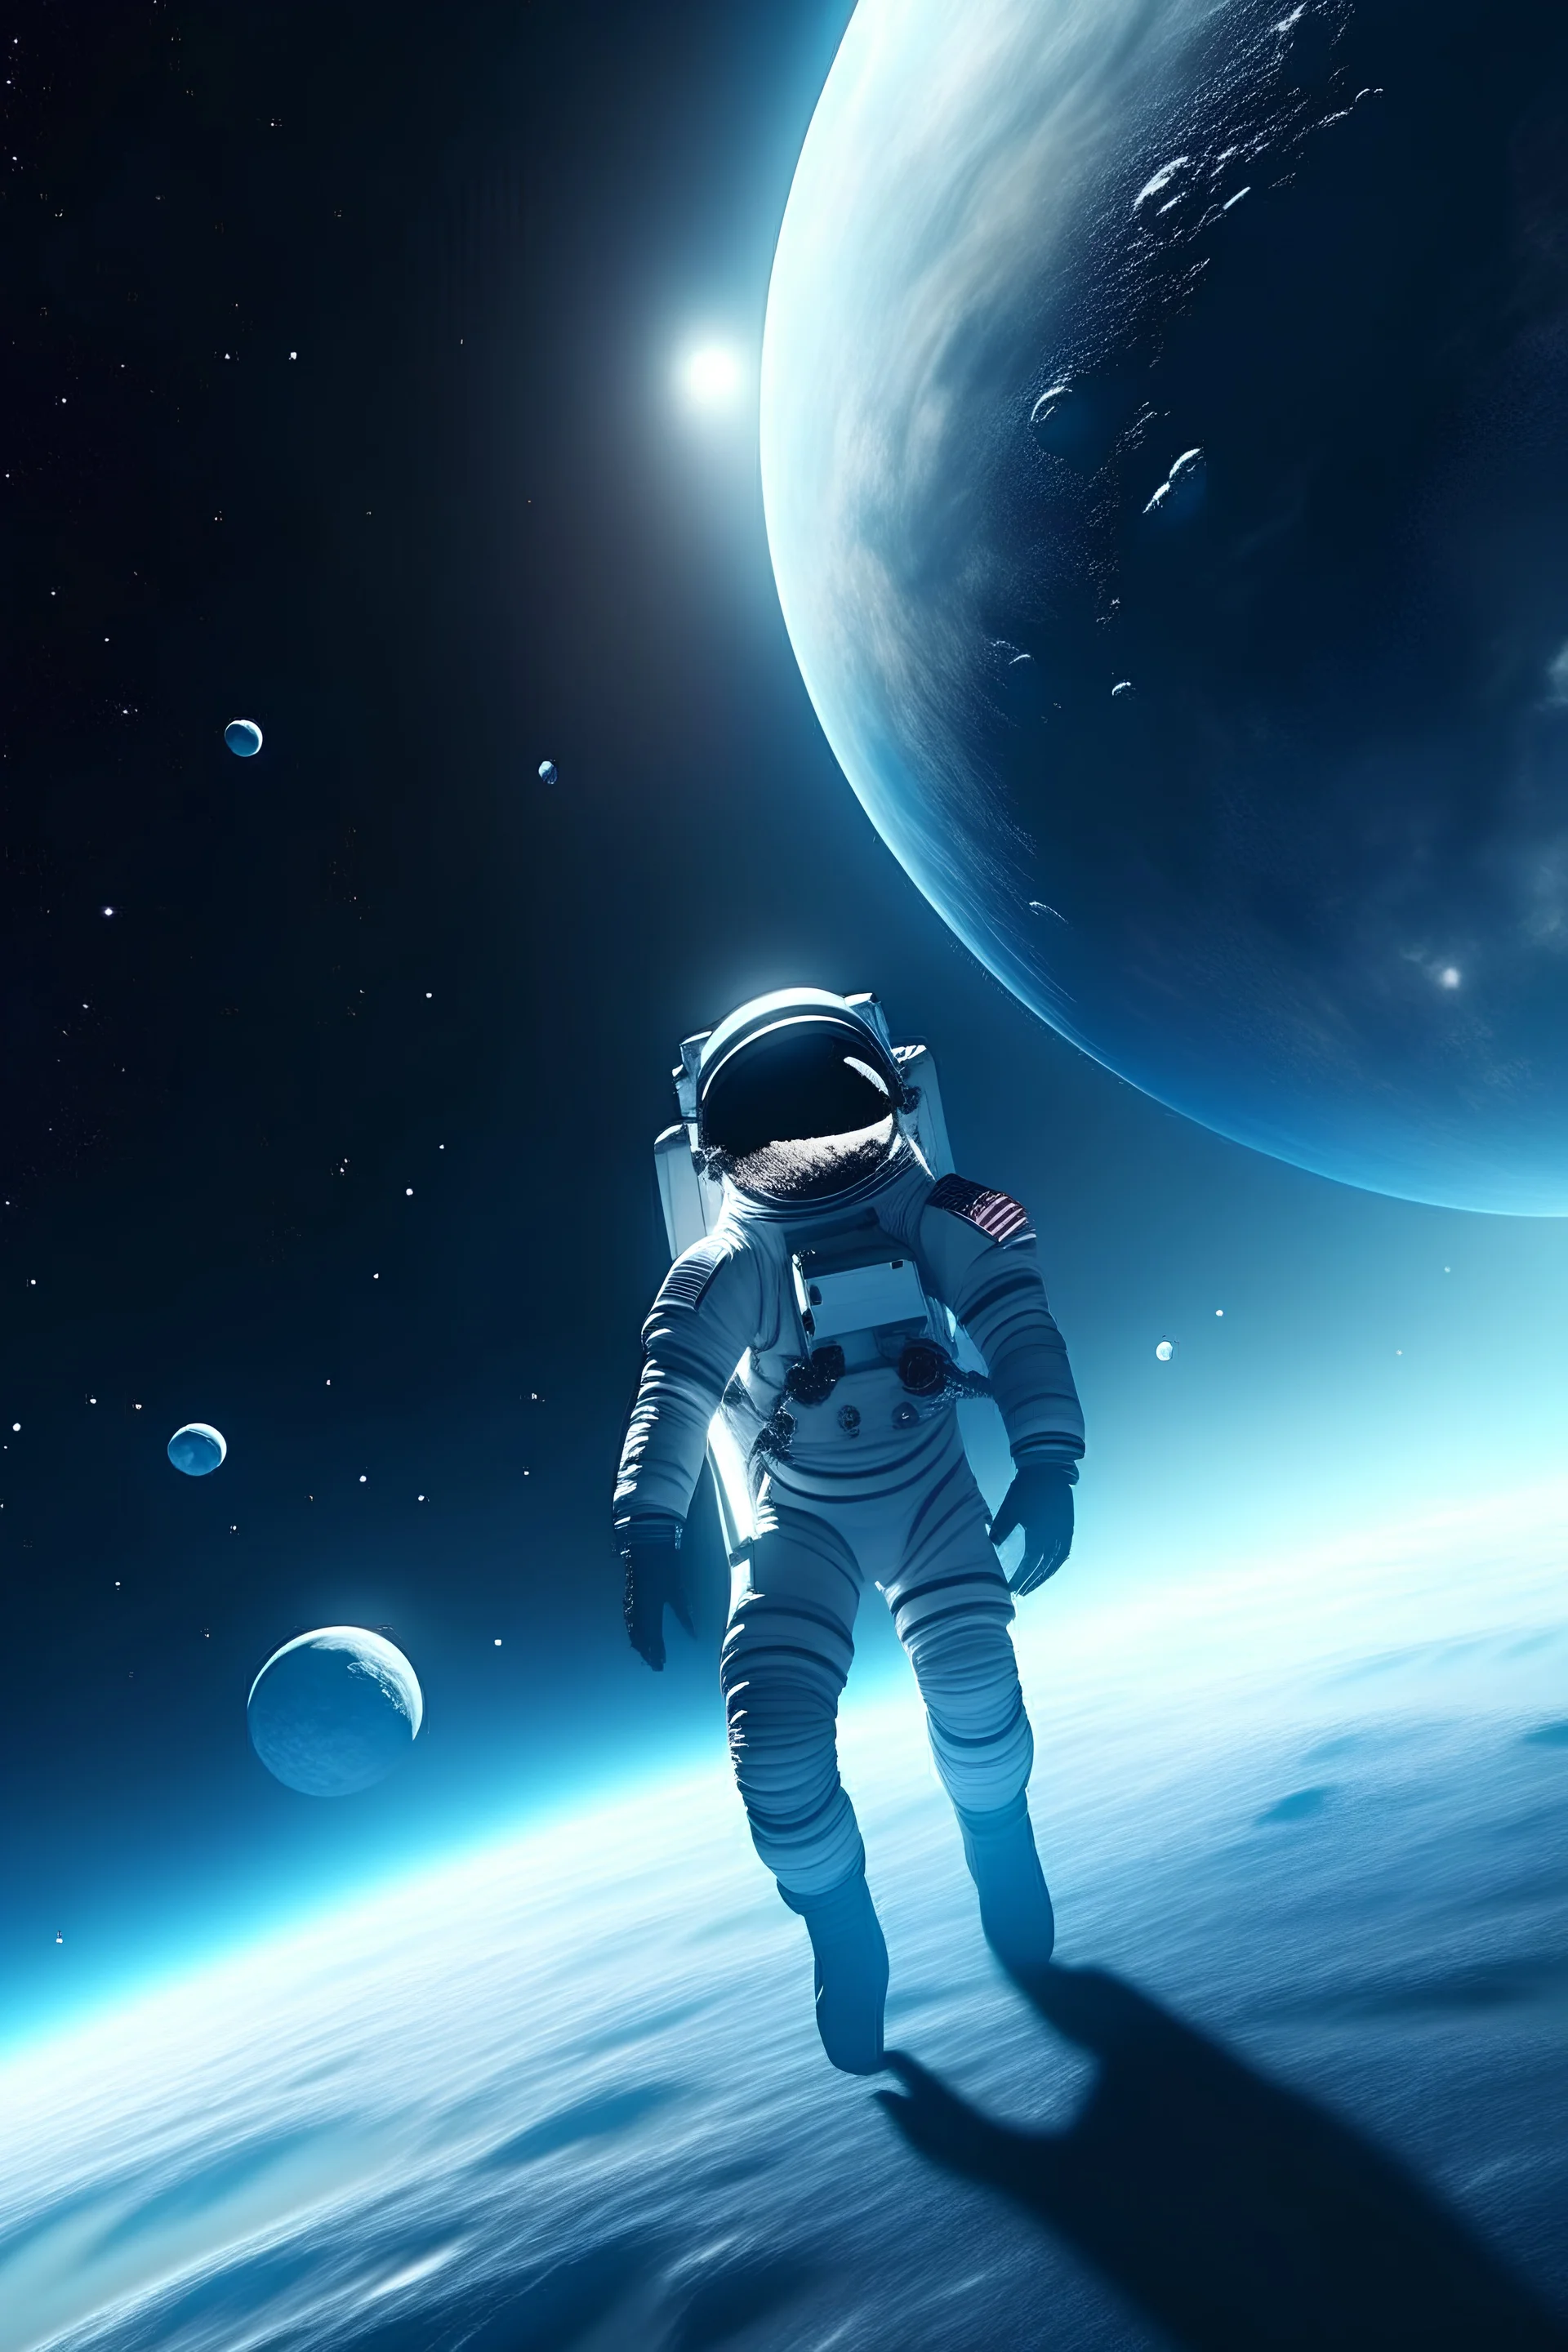 Astronaut stranded in space floating with a huge planet in the back ground, aliens in the background 8K fullscale